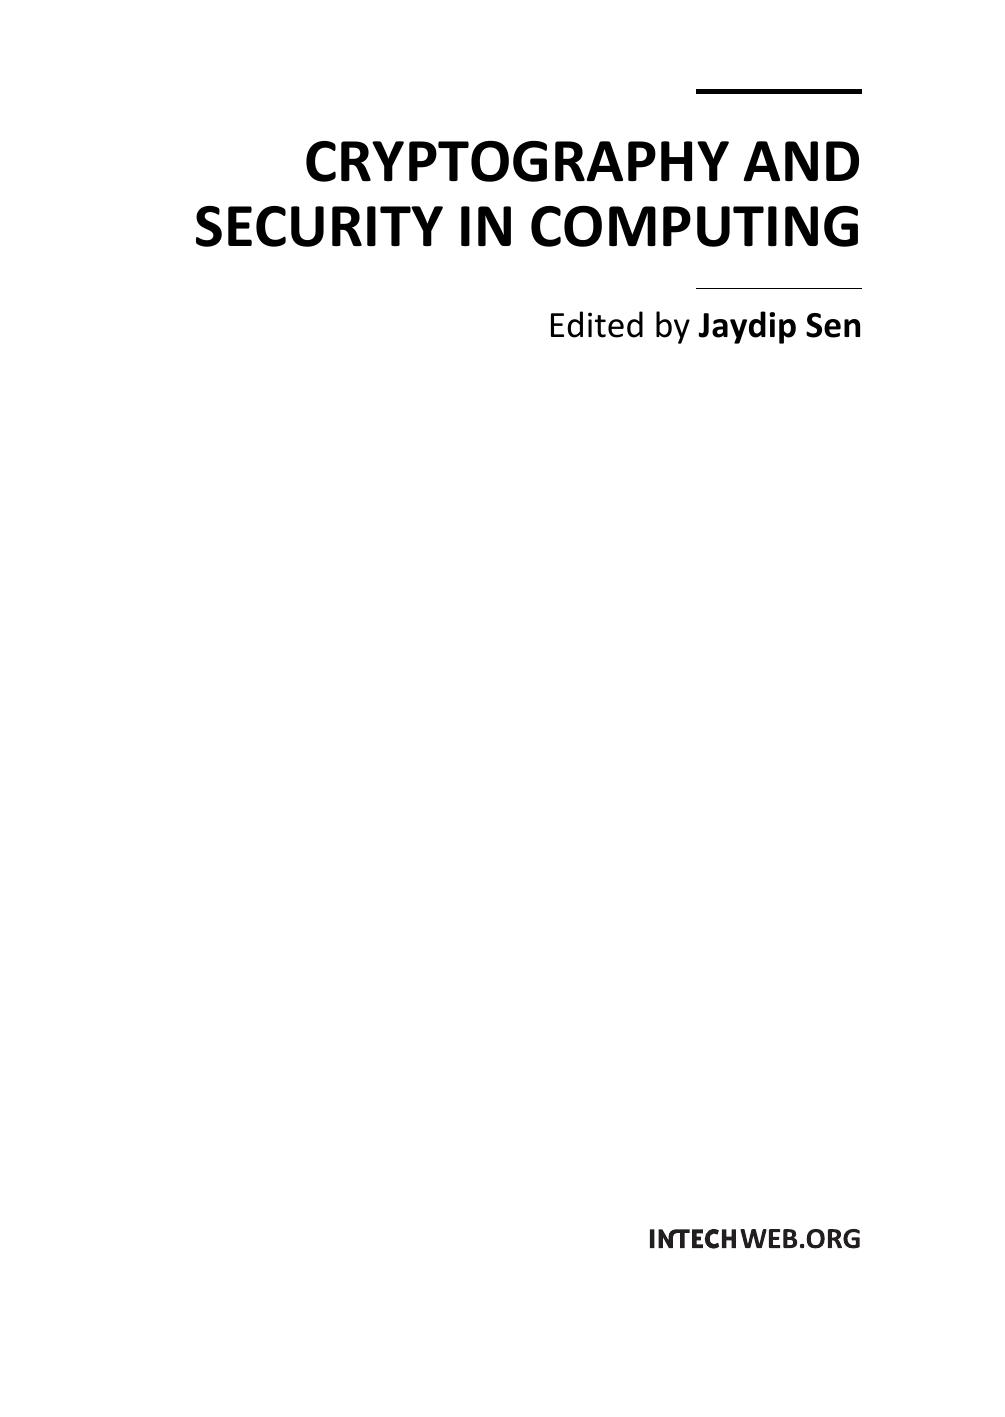 Cryptography and Security in Computing 2012.pdf